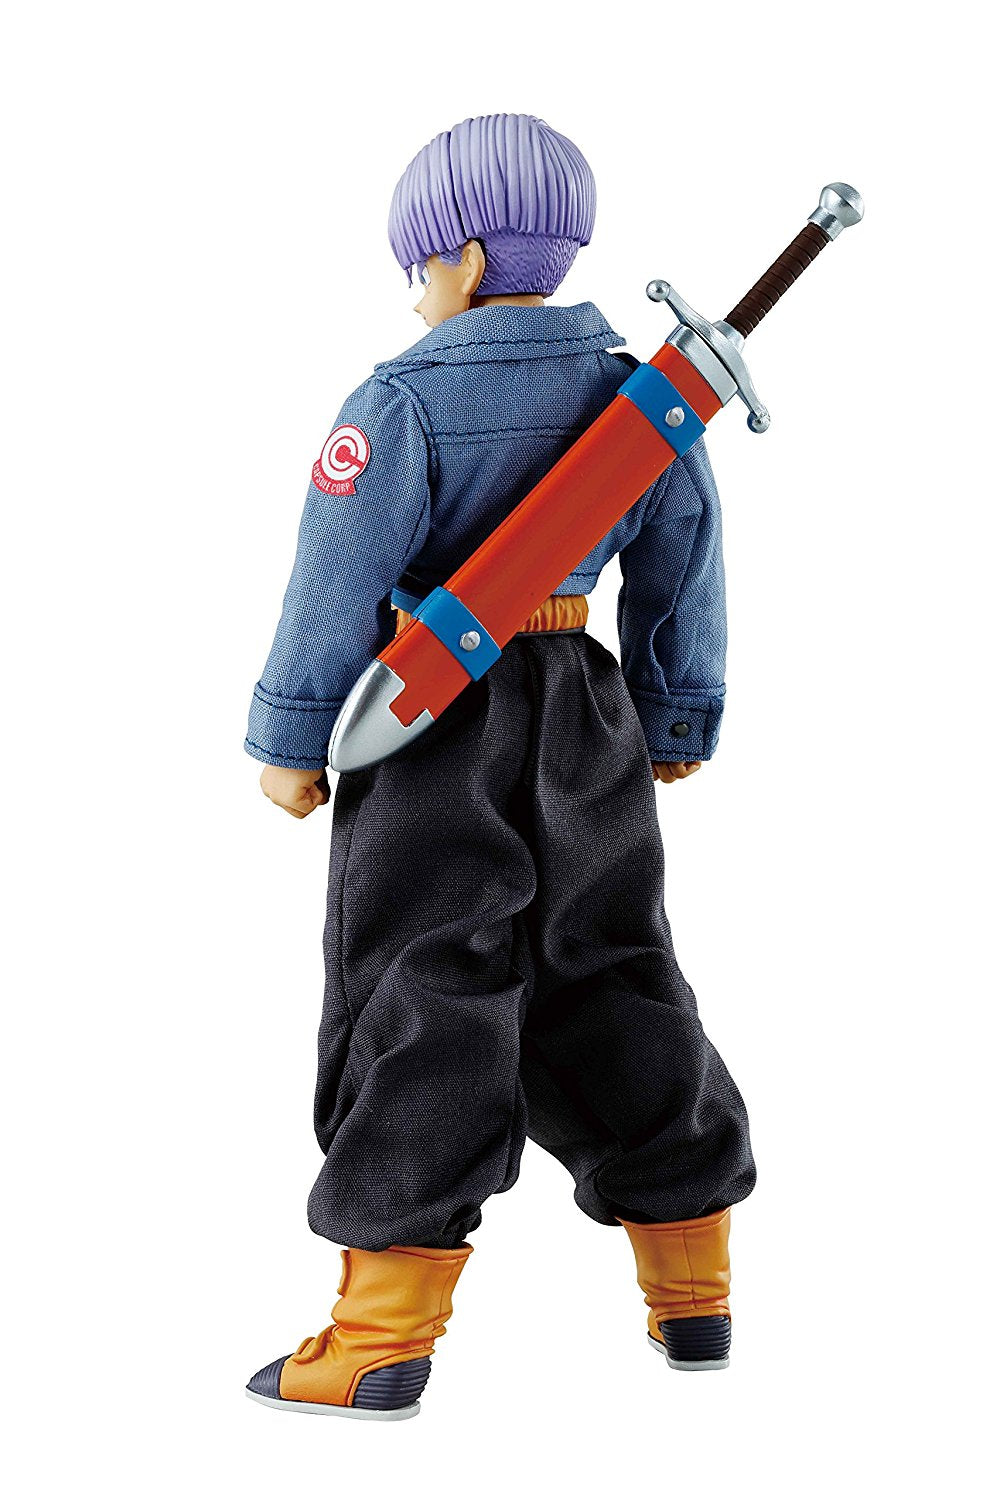 Megahouse Dimension Of Dragon Ball Z: Trunks Action Figure - Statue - The Hooded Goblin